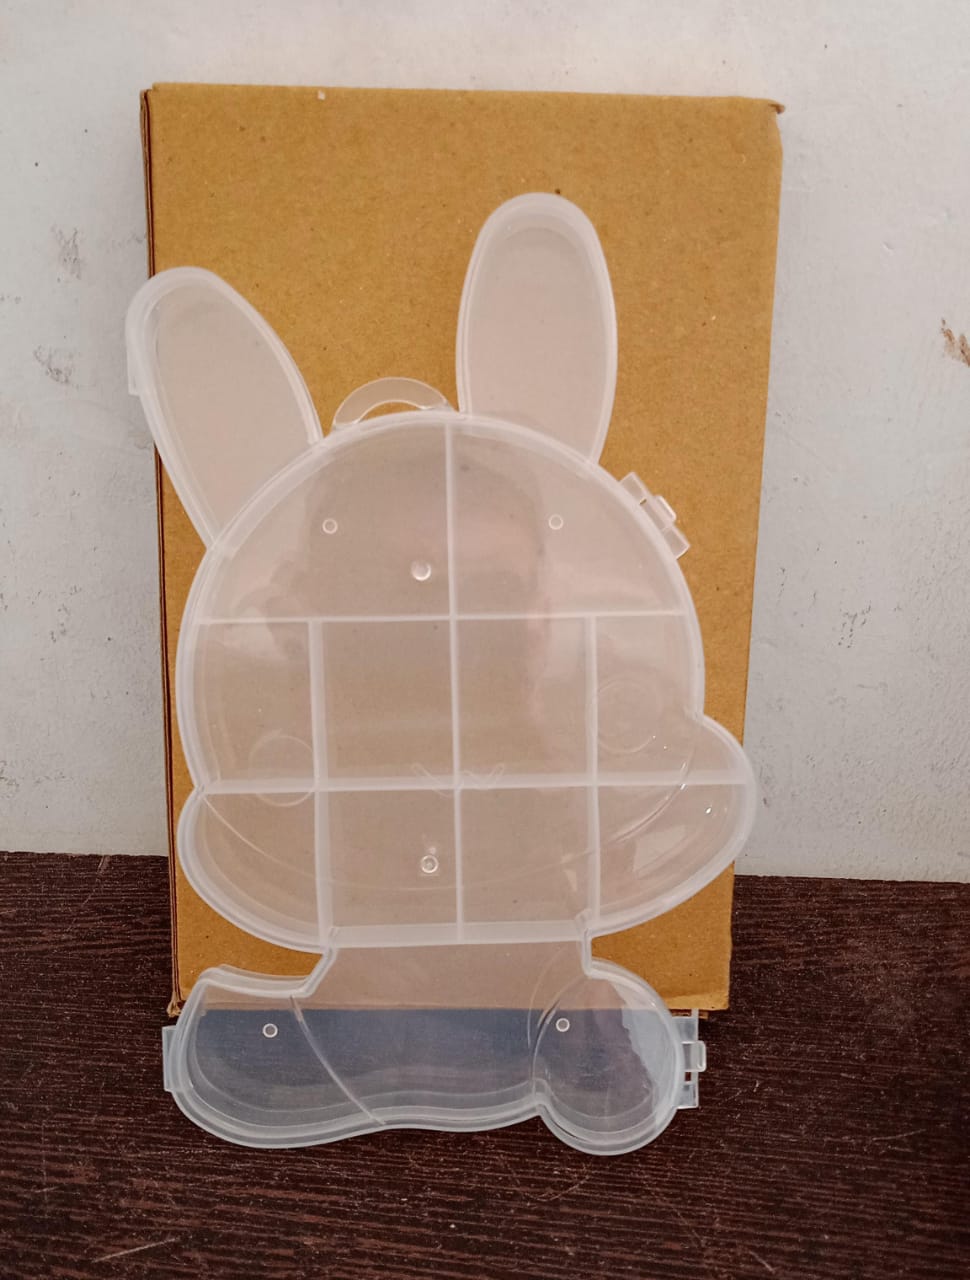 6557 Transparent Cartoon Bear Clear Plastic Storage Box Jewelry Box Jewelry Organizer Holder Cabinets For Small objects (1 Pc Mix Color)